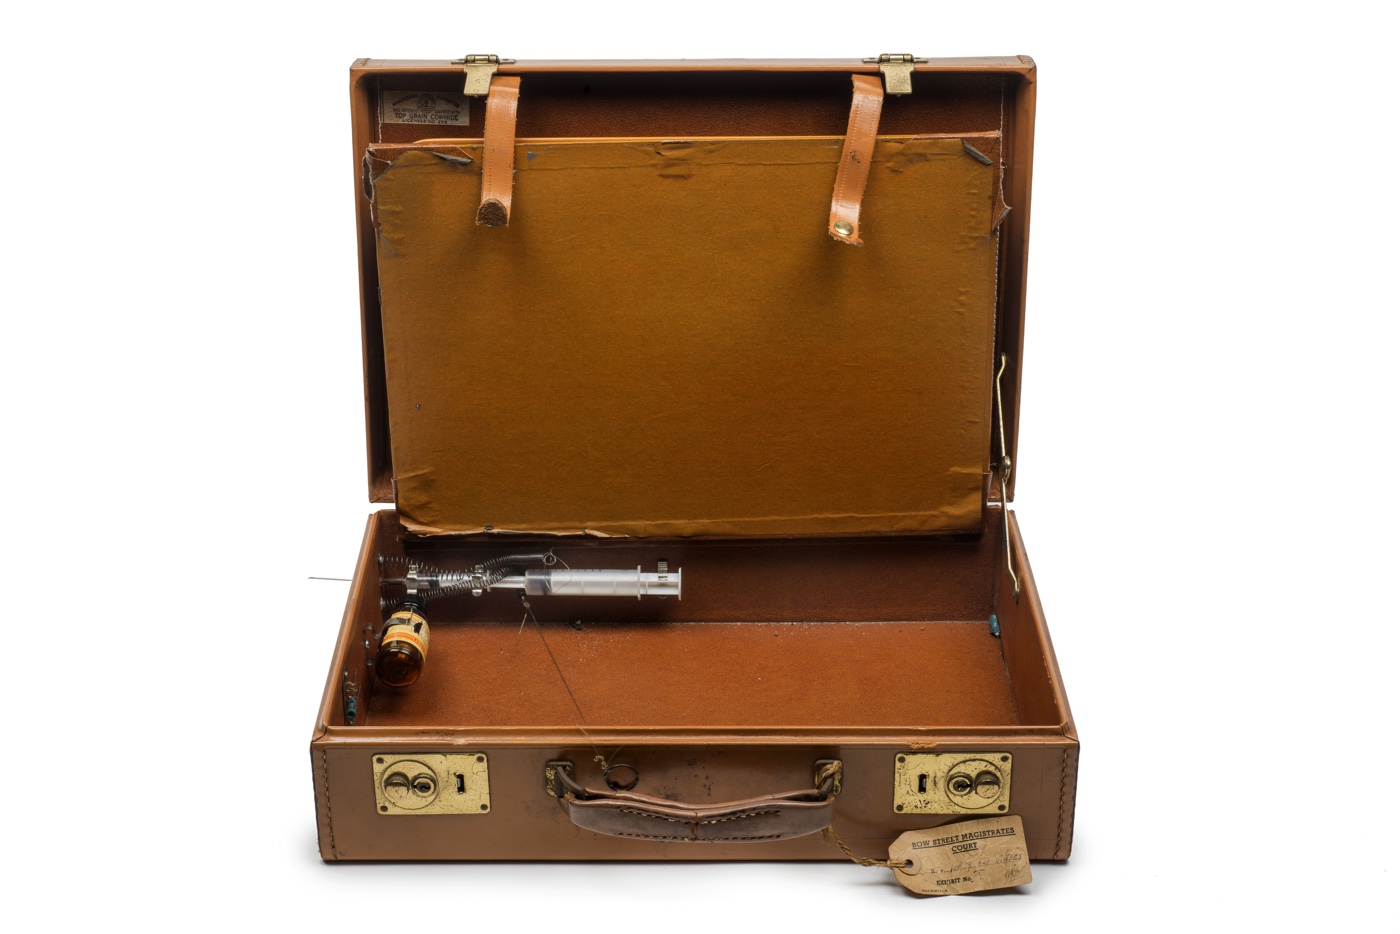 Ronnie and Reggie Kray: Briefcase with syringe and posion intended for use against a witness at the Old Bailey (never used), 1968 © Museum of London